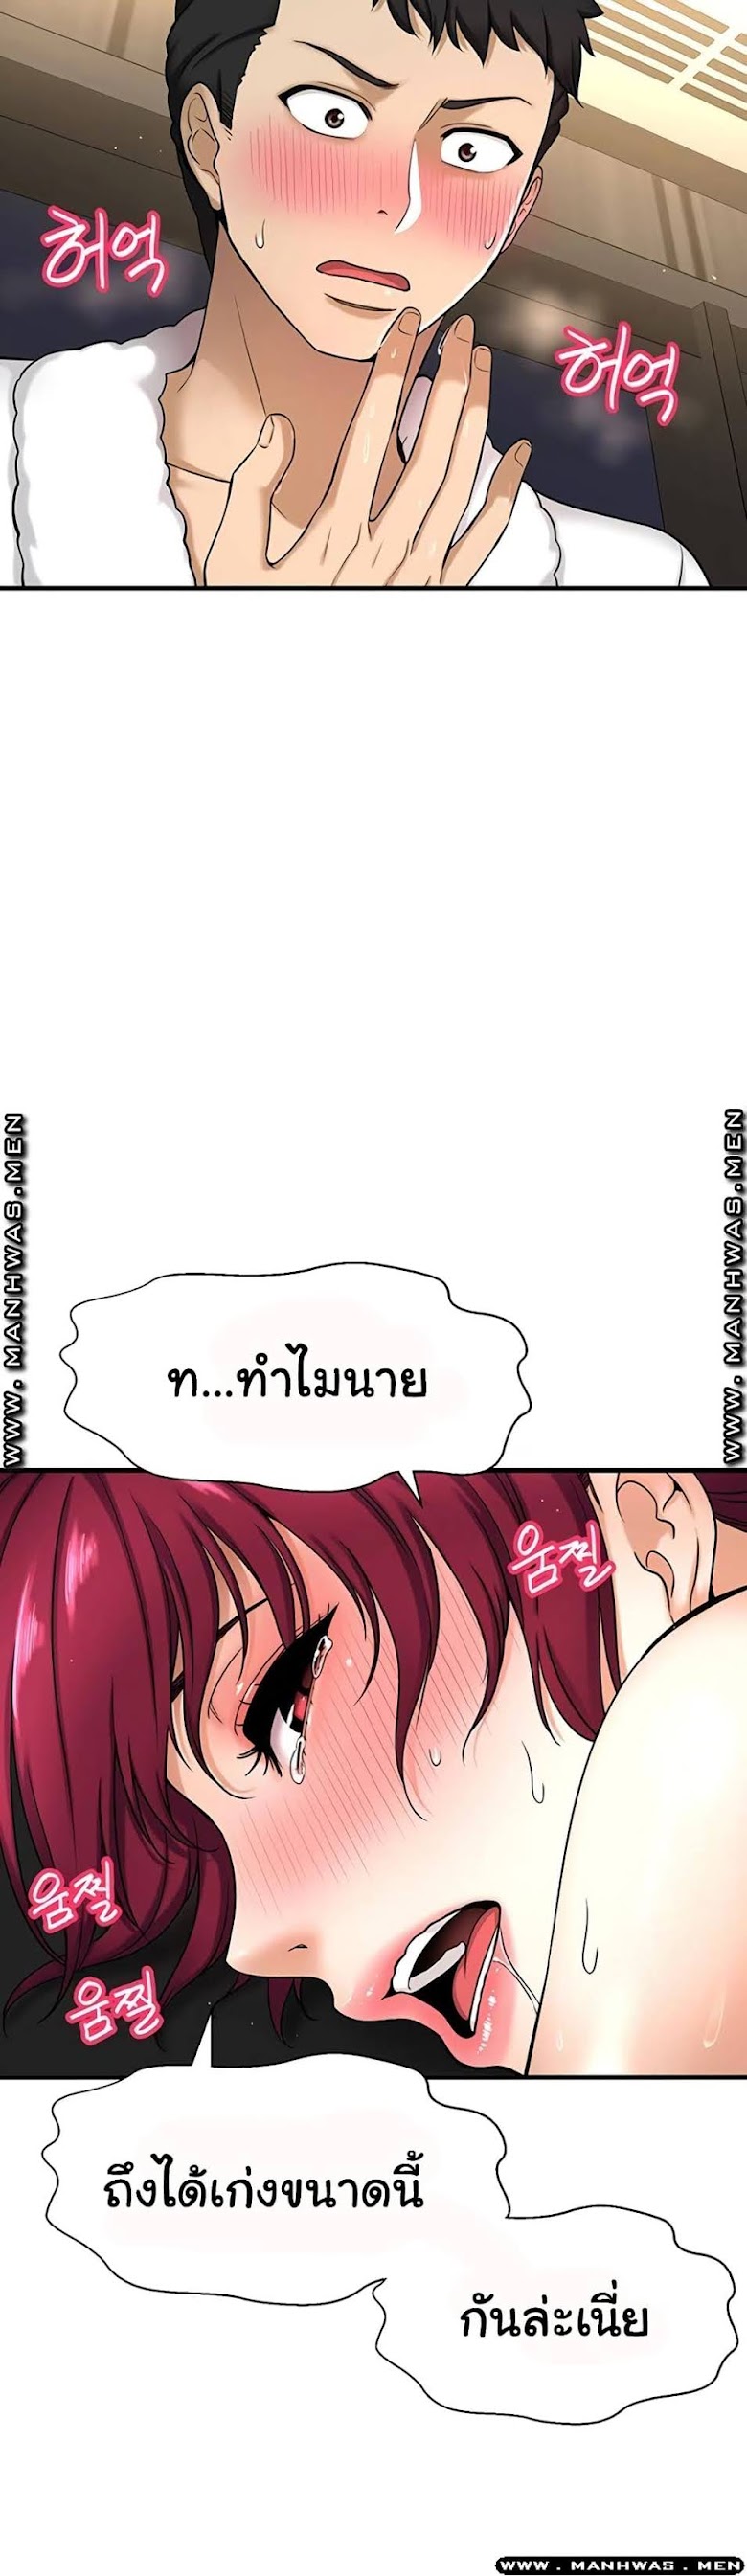 I Want to Know Her - หน้า 1